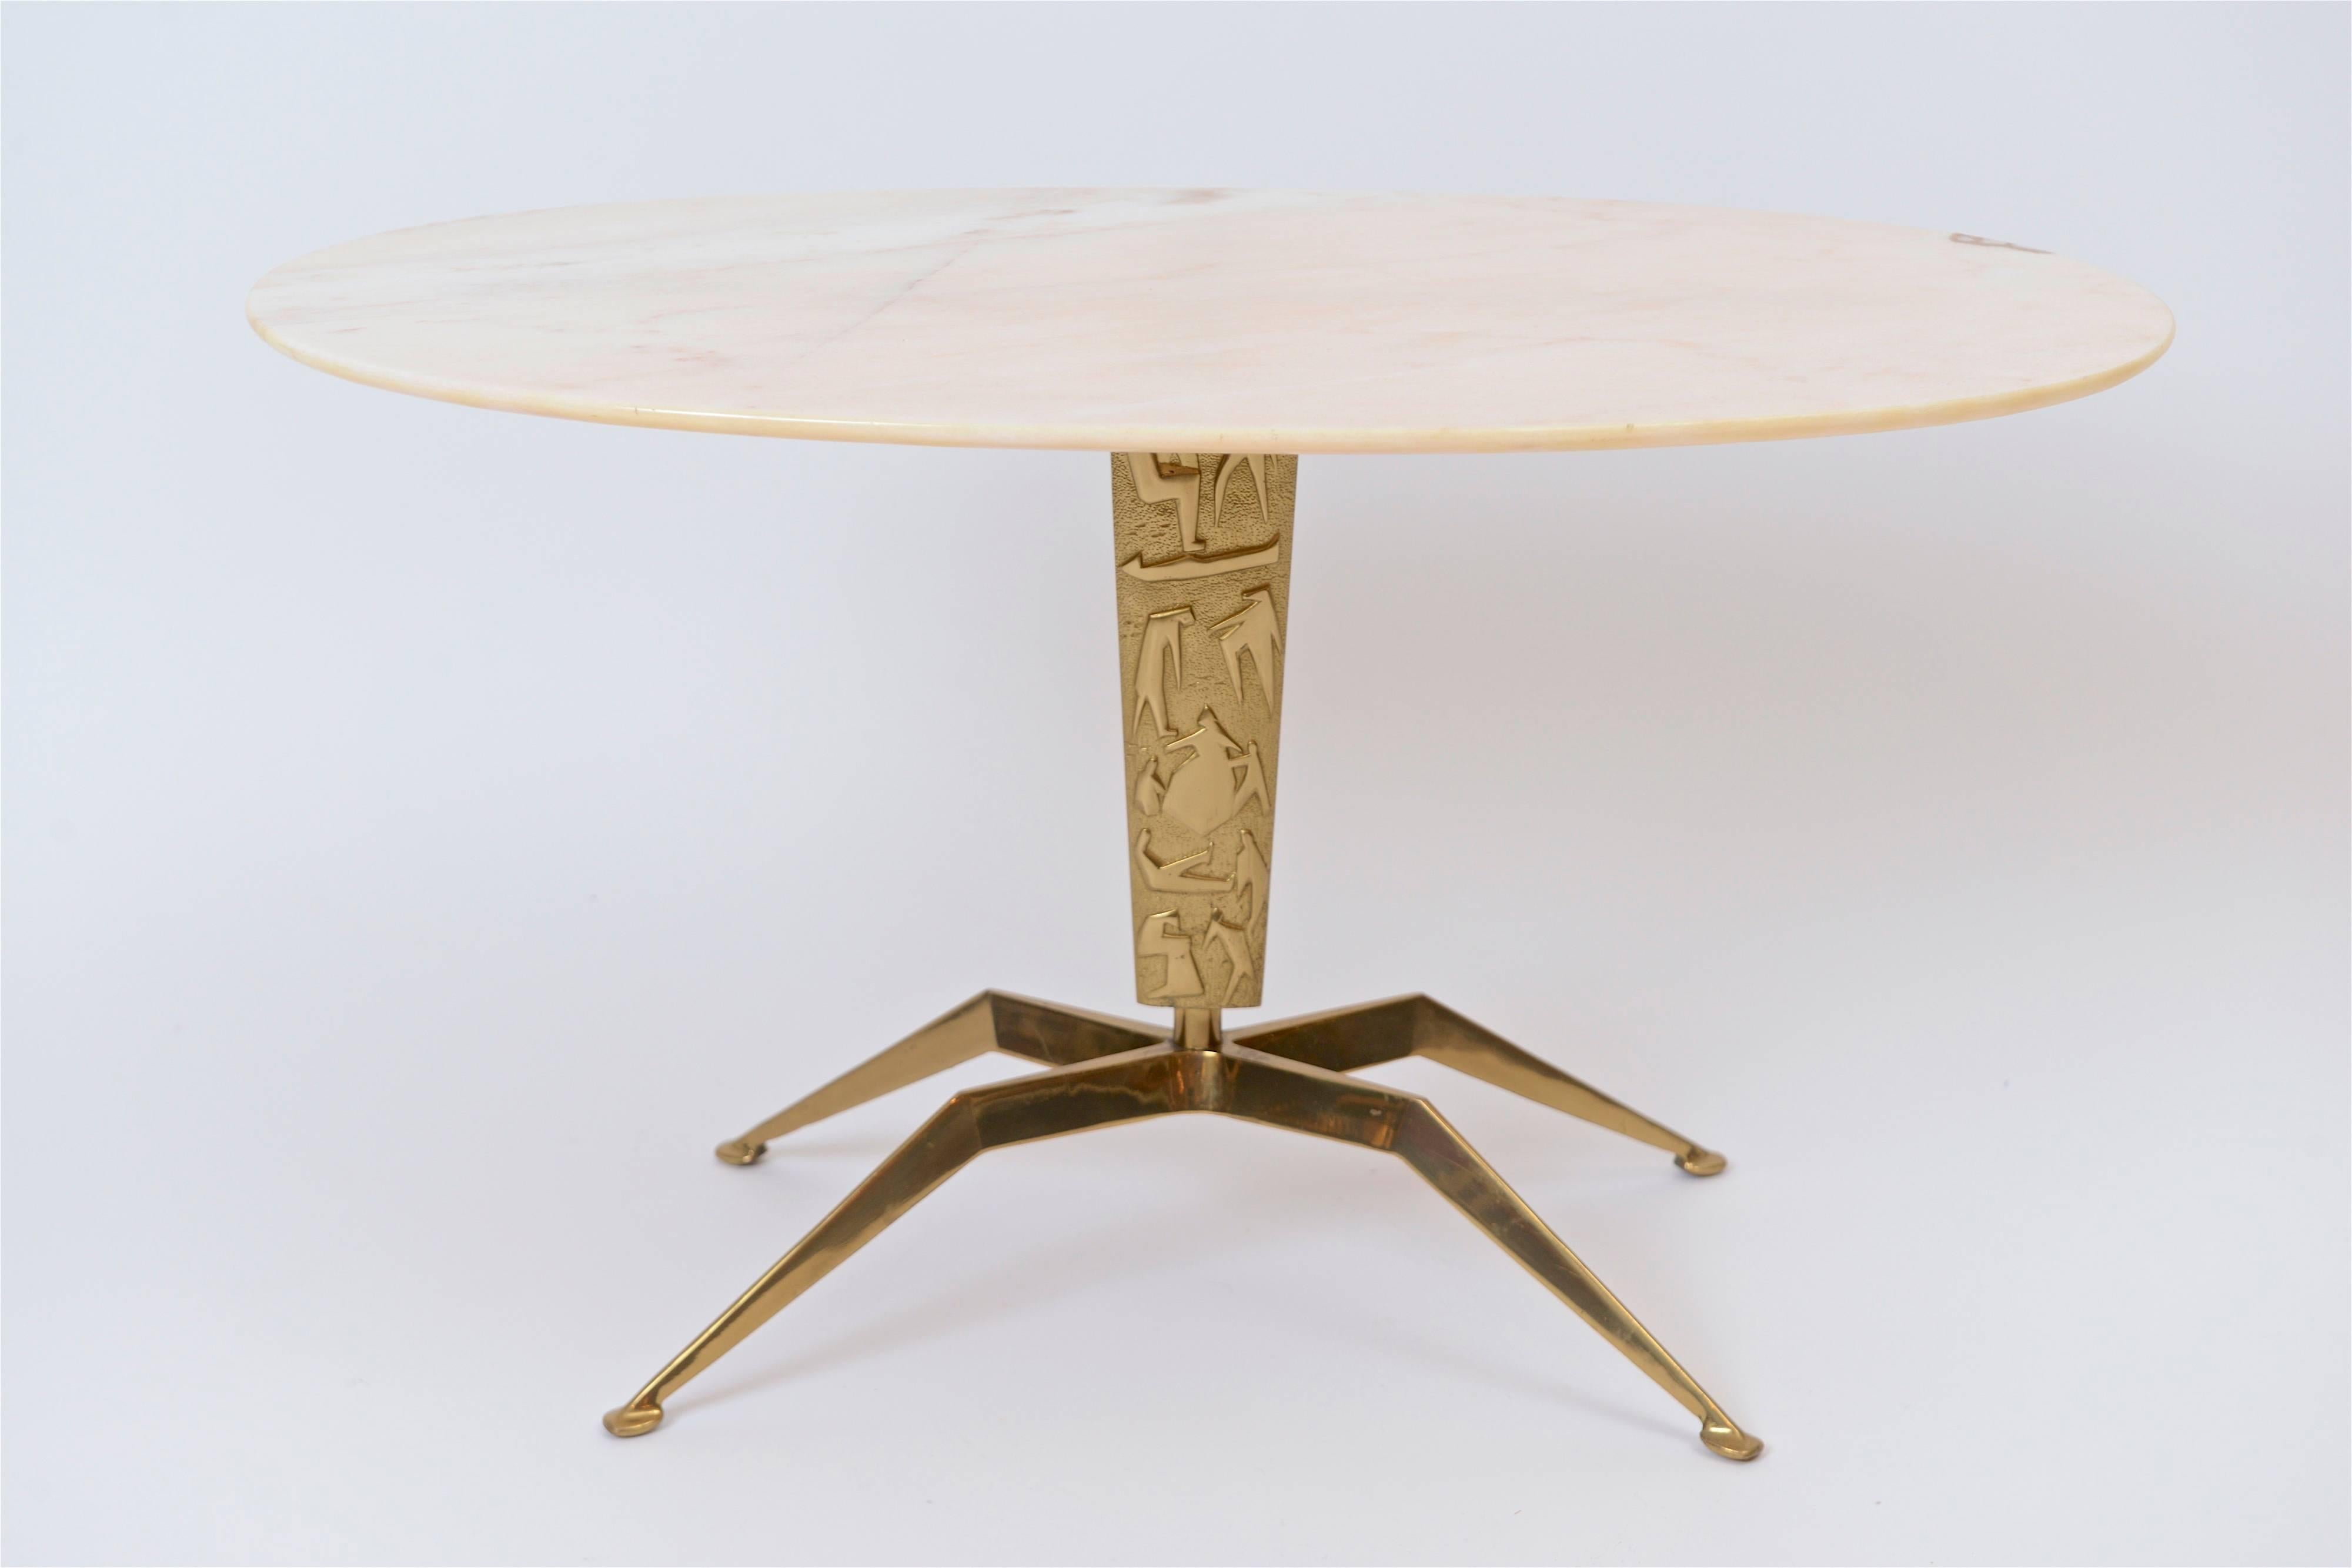 An Italian pink and white onyx coffee table with an abstrac sculptural design on its central brass support. Possibly depicting the ‘story of life’ or ‘the seven ages of man’, this wonderfully decorative table support sits on four slimline brass legs